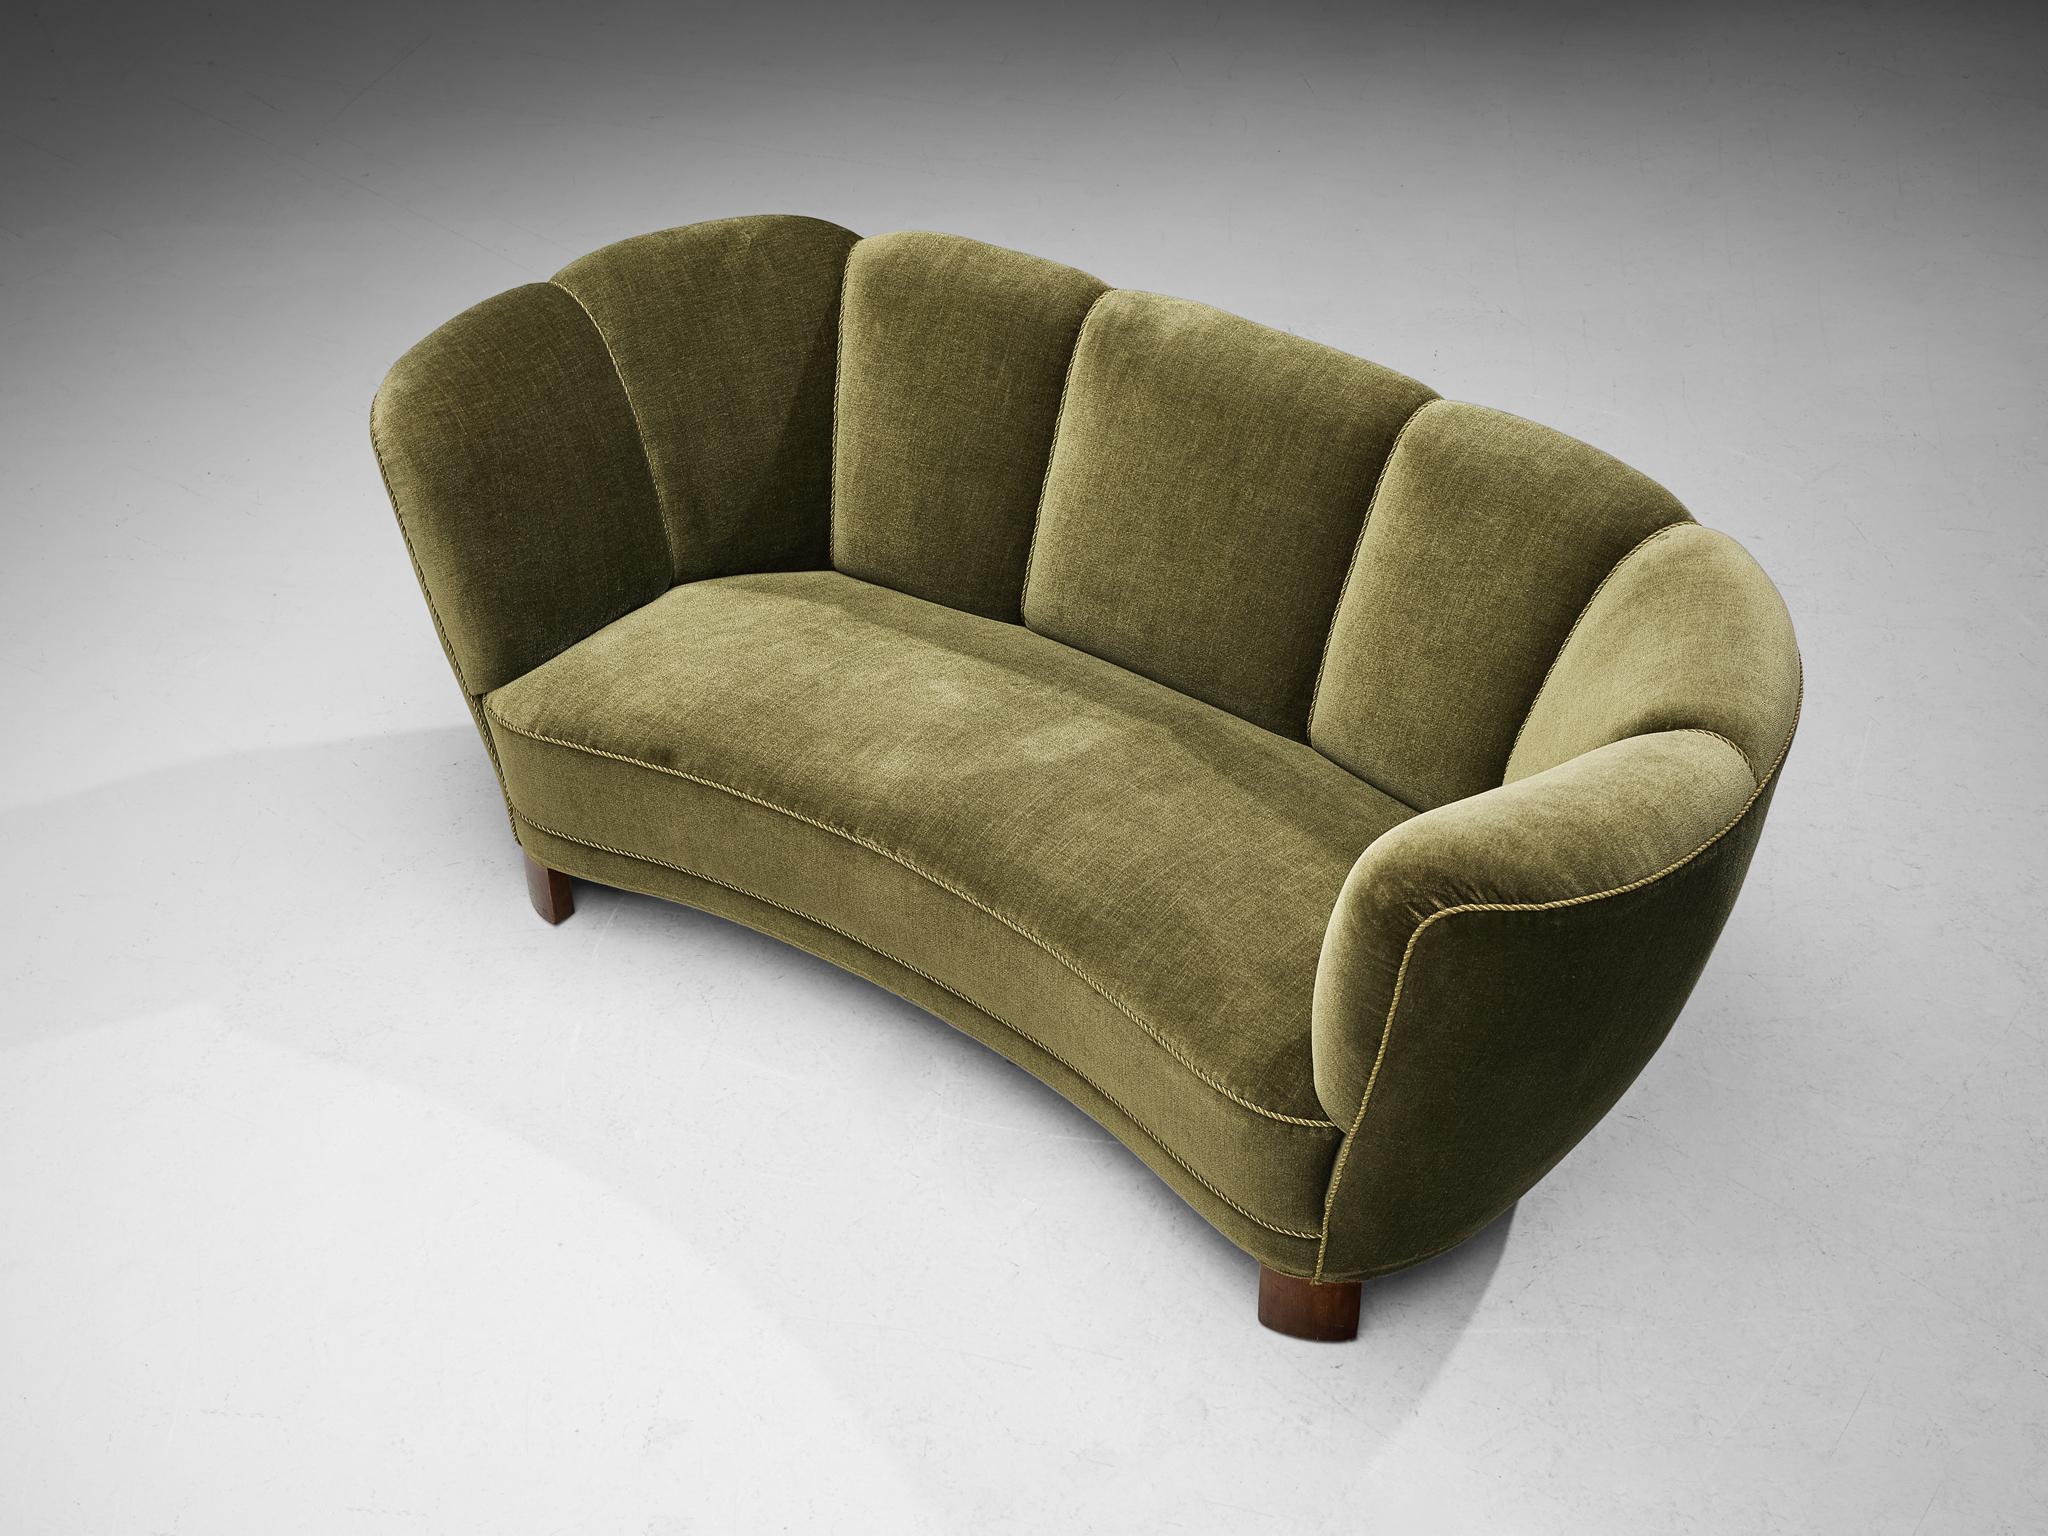 Banana sofa, velvet, wood, Denmark, 1940s

This voluptuous sofa is based on a solid construction of round shapes and curvaceous lines. The seating area and the backrest are organically shaped and together with the absence of strict angles, the